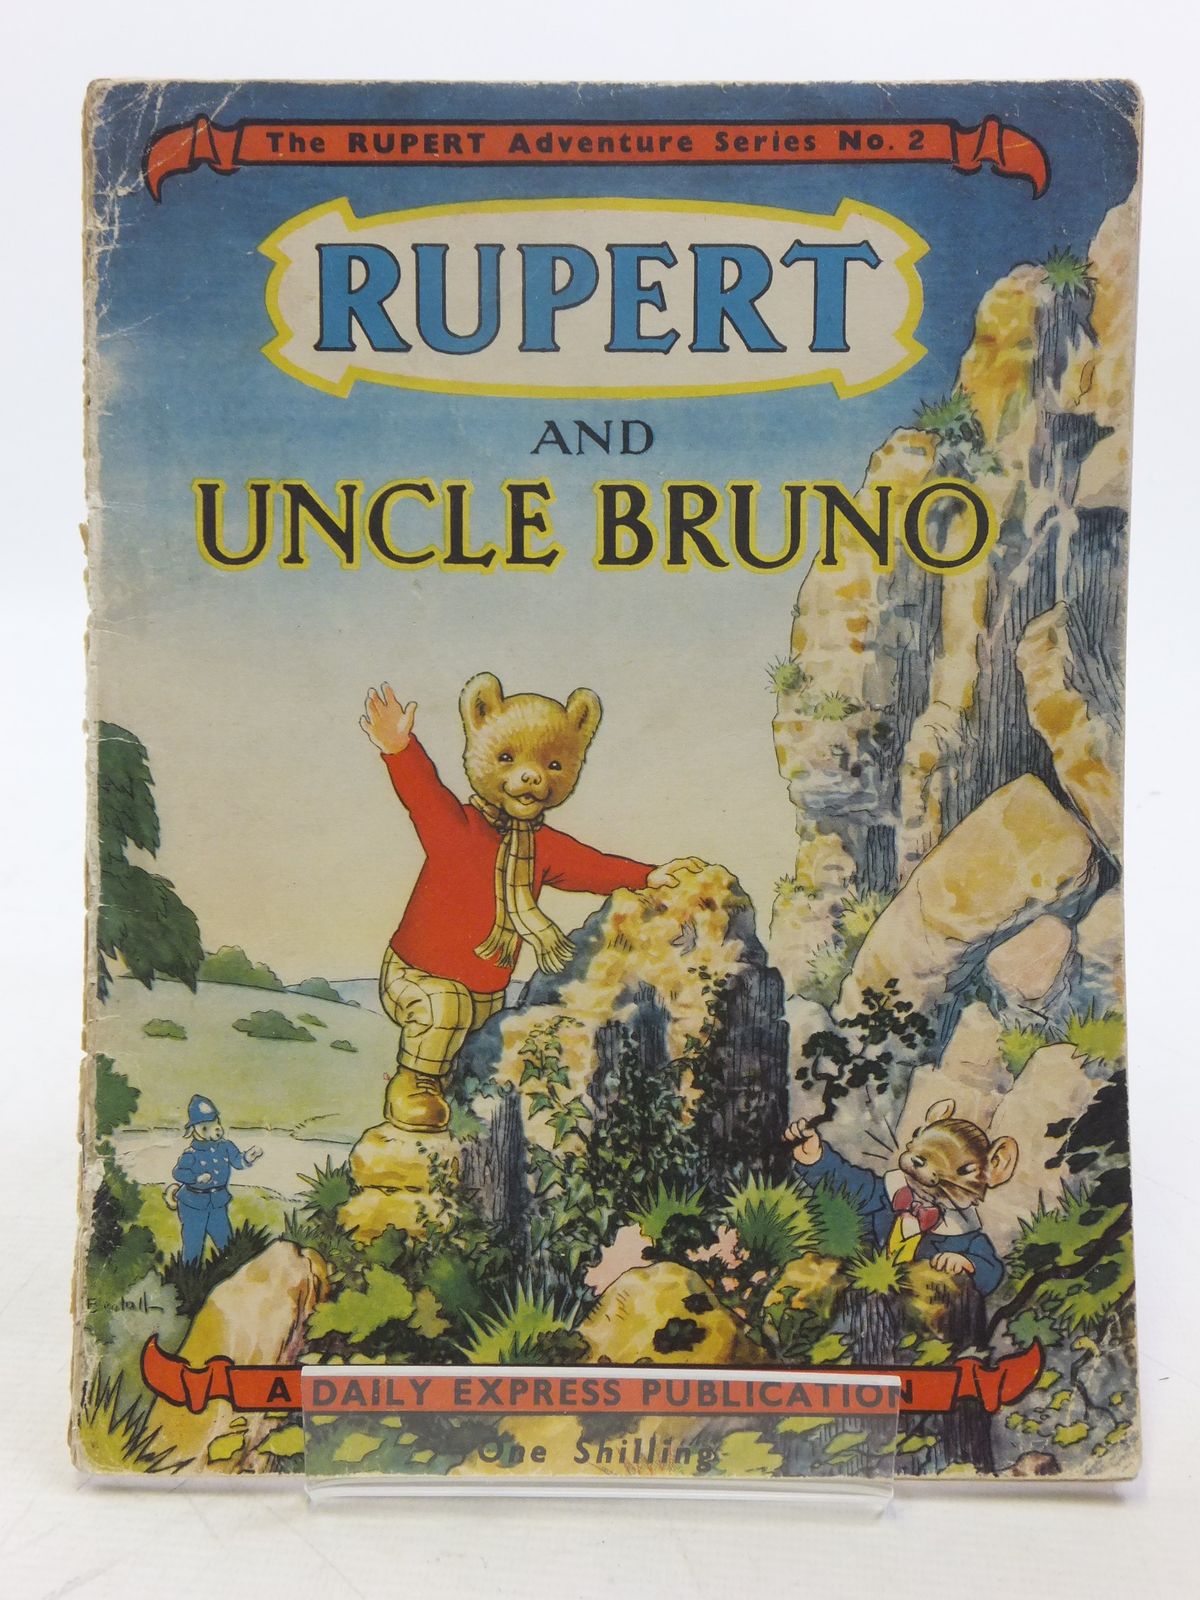 Photo of RUPERT ADVENTURE SERIES No. 2 - RUPERT AND UNCLE BRUNO written by Bestall, Alfred illustrated by Bestall, Alfred published by Daily Express (STOCK CODE: 2119446)  for sale by Stella & Rose's Books